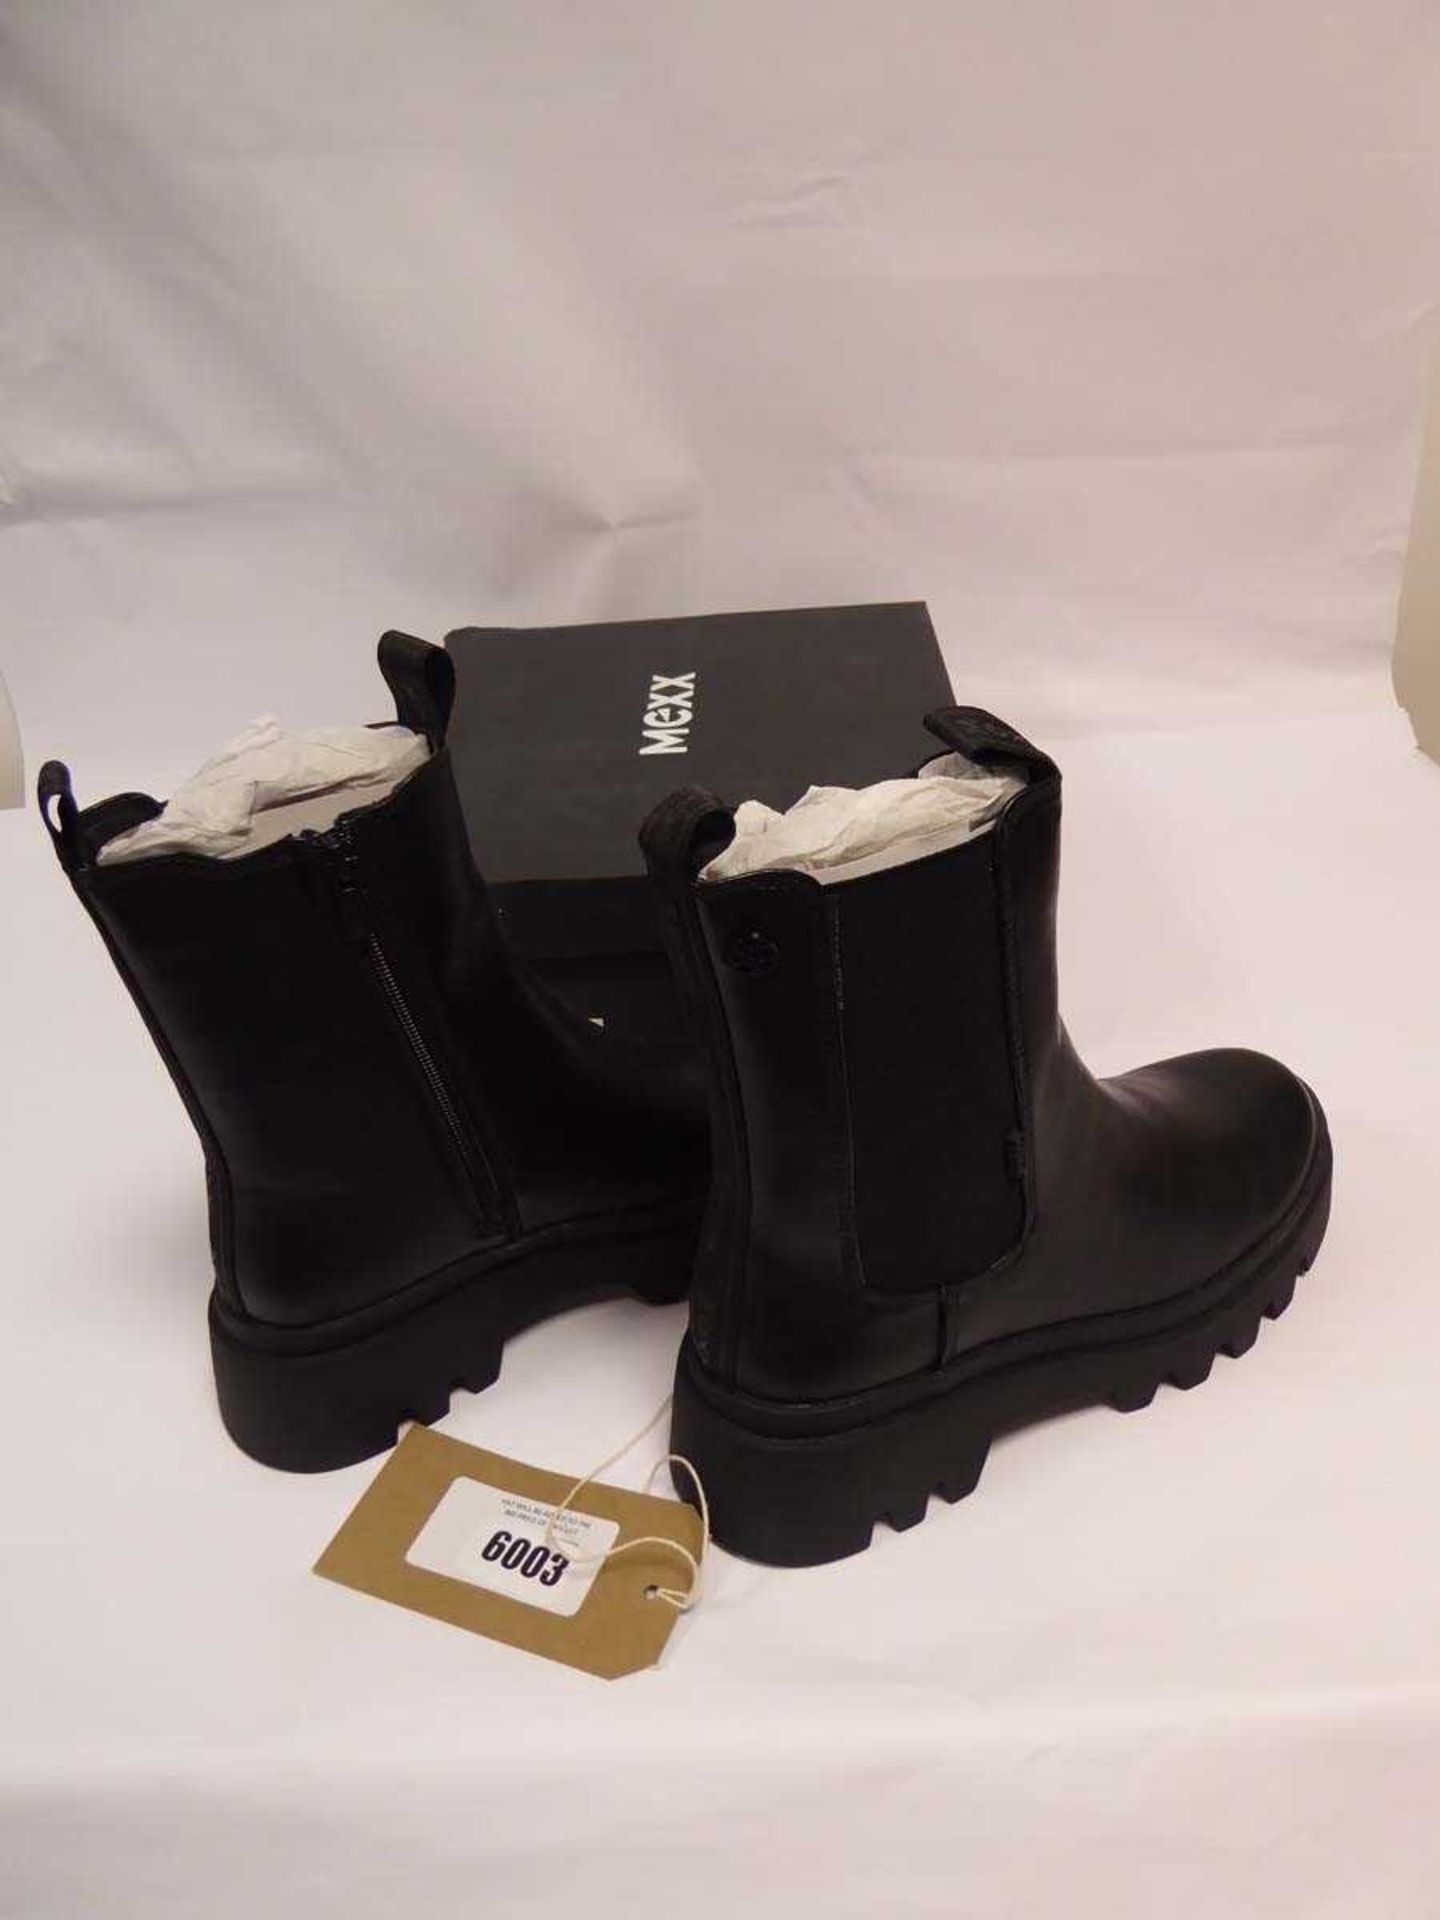 +VAT Pair of boxed Mexx Kayra ankle boots, size 6 - Image 2 of 3